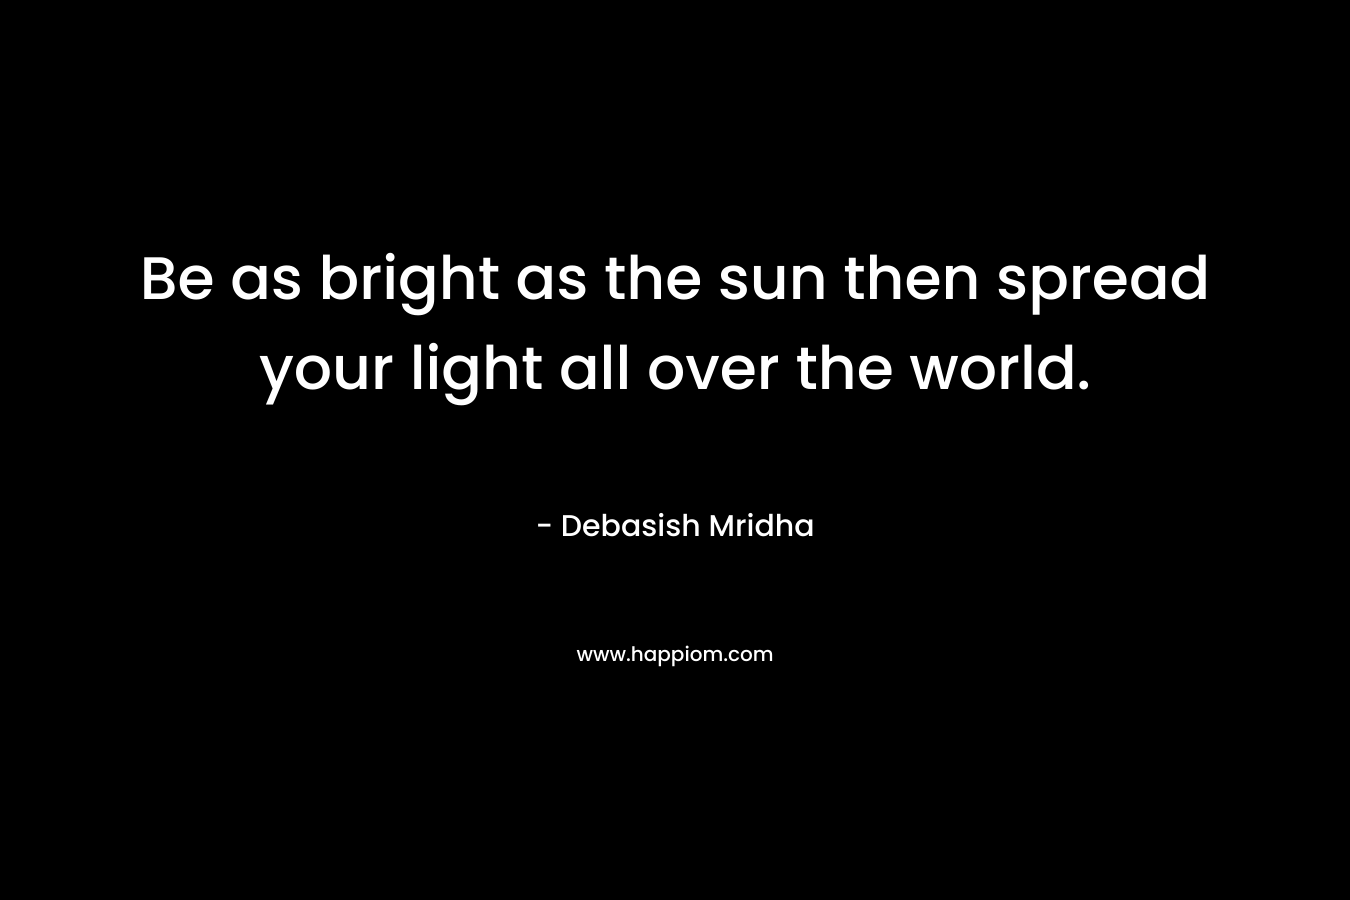 Be as bright as the sun then spread your light all over the world.